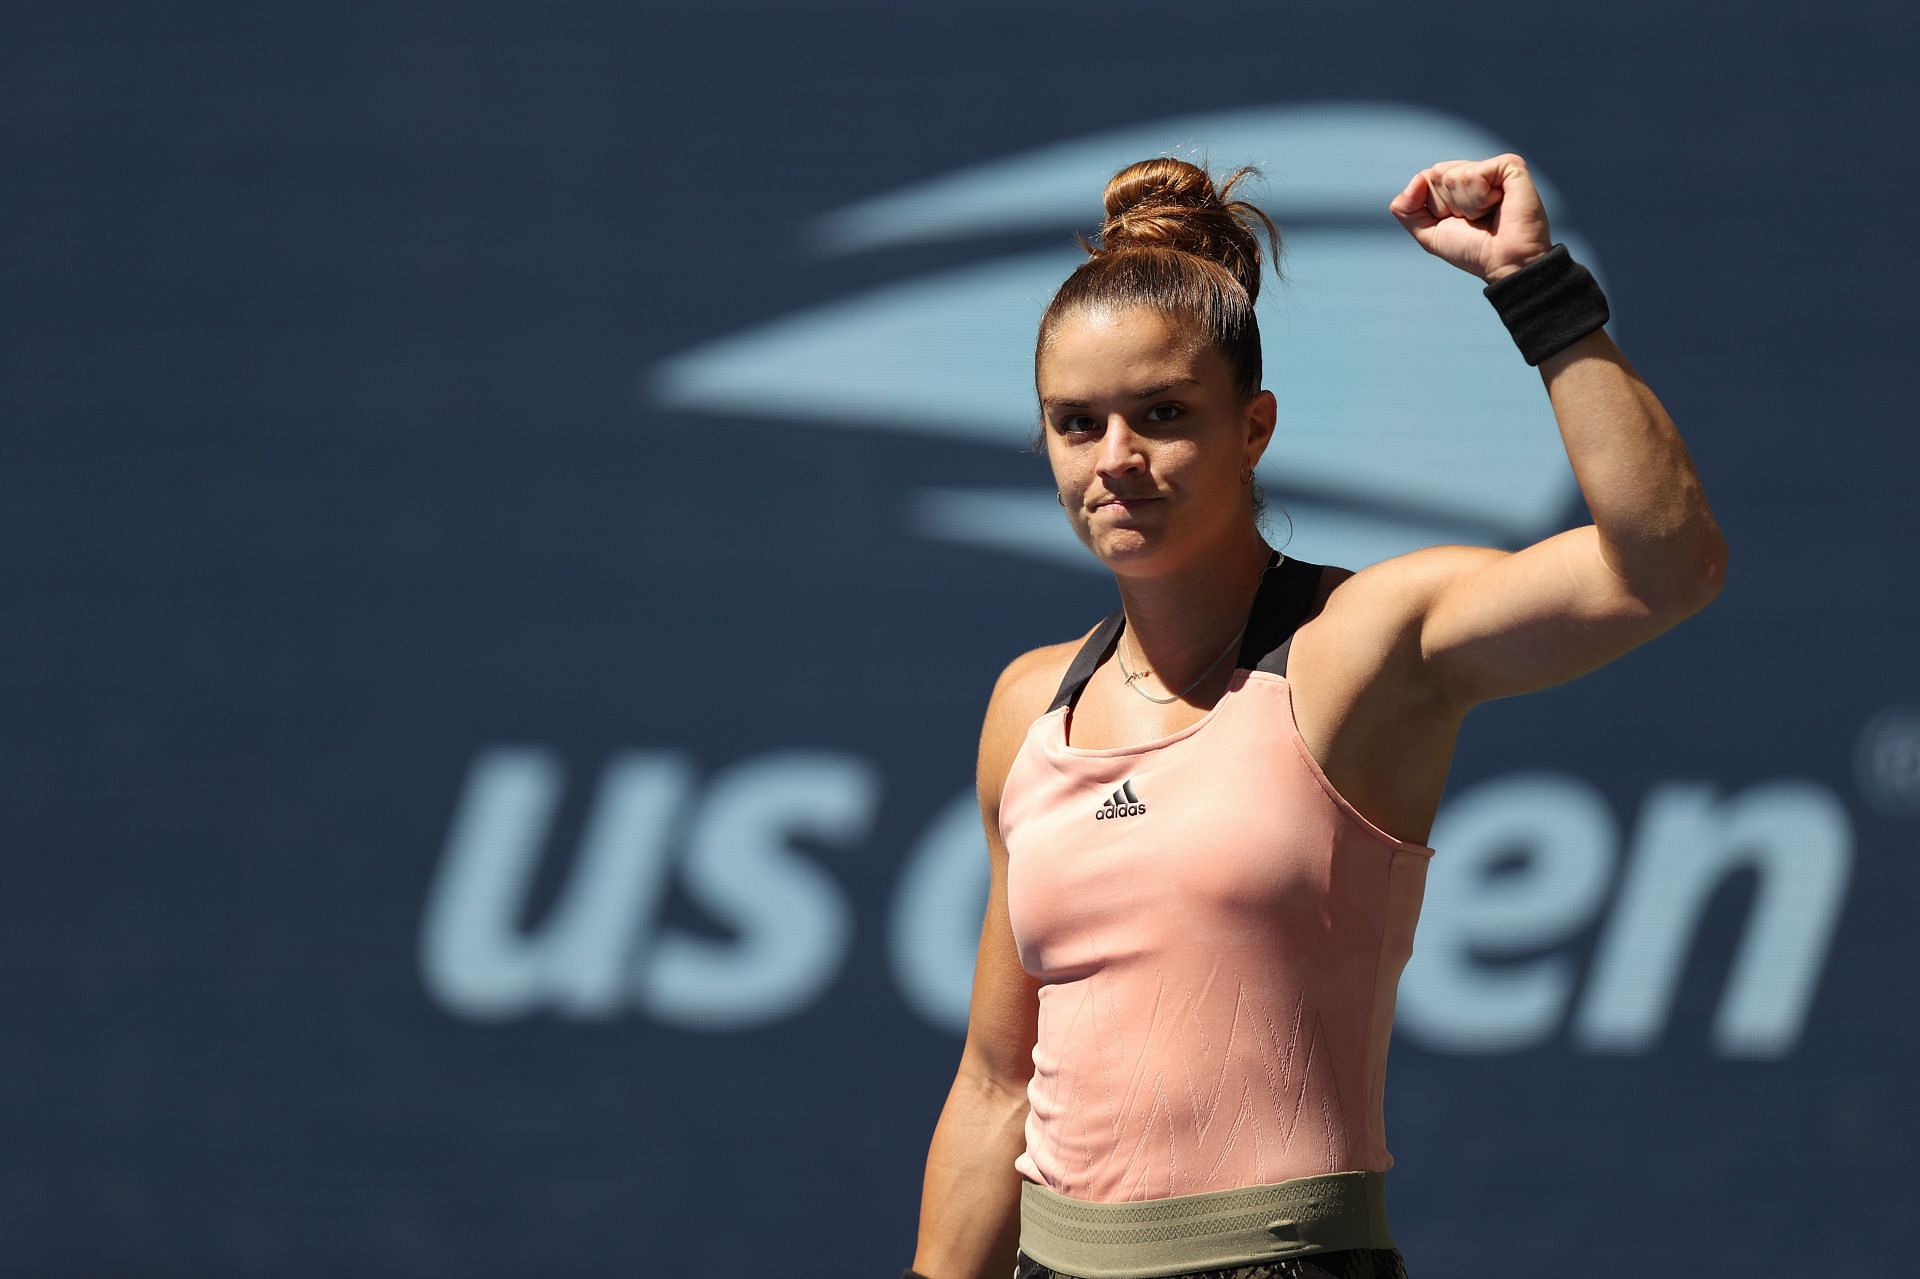 Maria Sakkari will have to wait till the clay swing to snatch the No. 1 spot from Ashleigh Barty